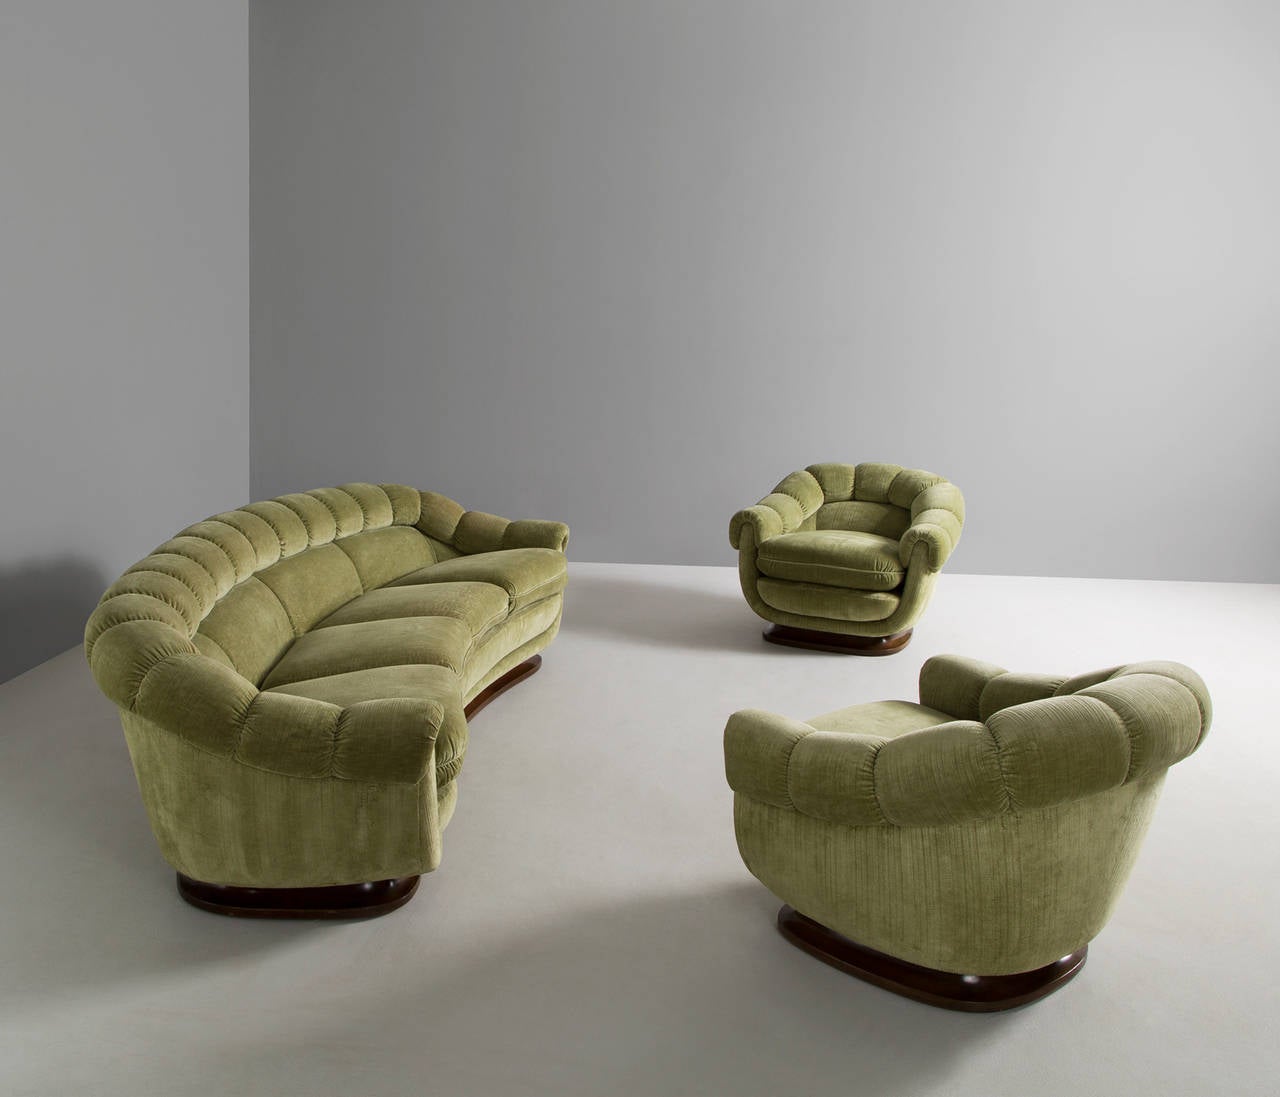 Mid-20th Century Elegant Curved Italian Sofa with Round Shapes